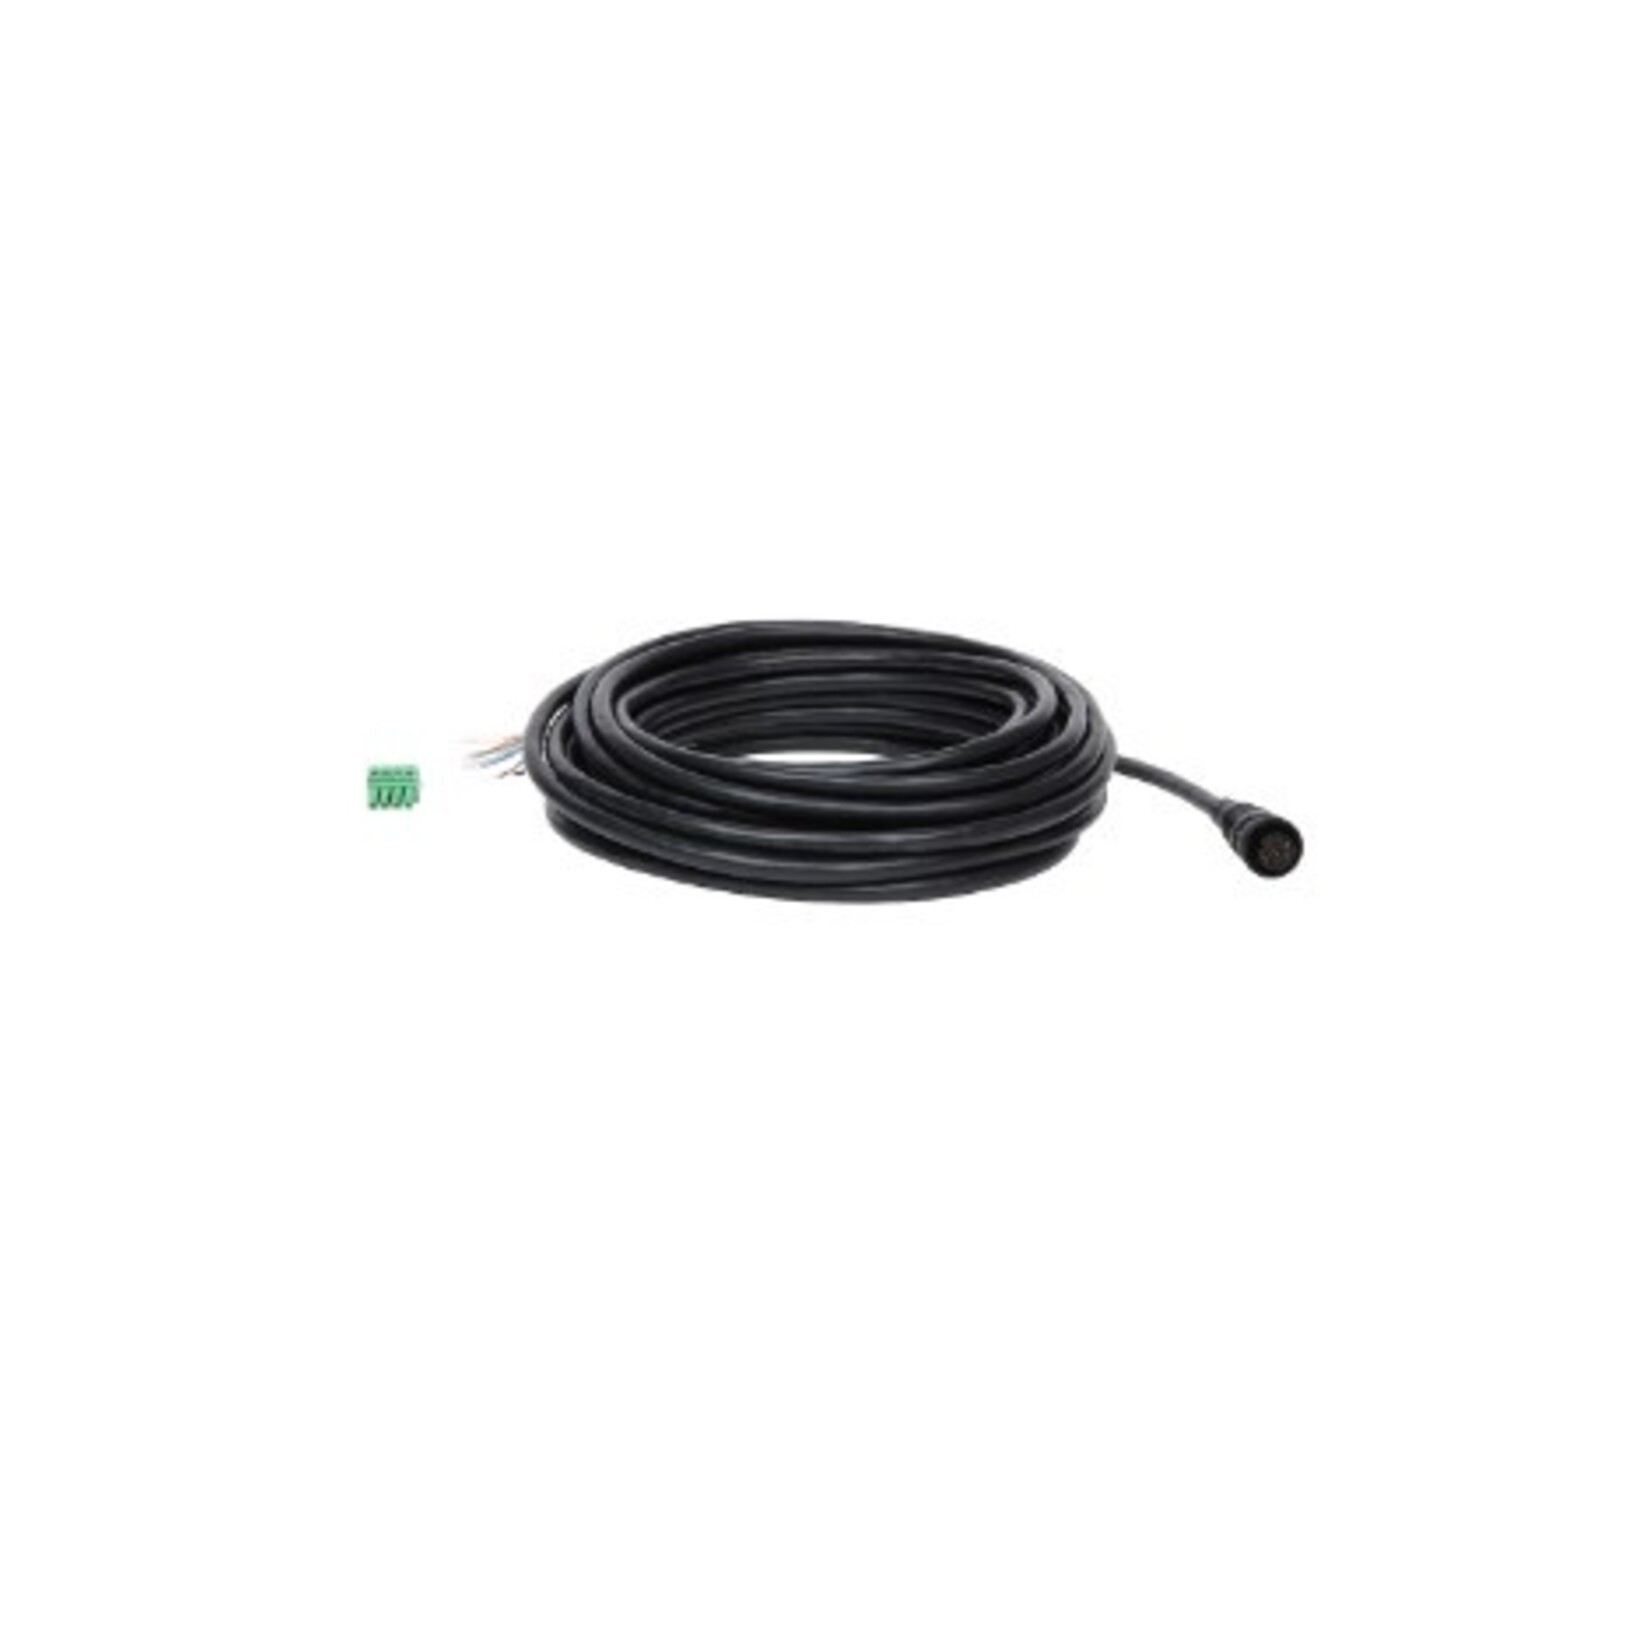 NMEA0183 Serial Cable - LTW 8 Way - 10M